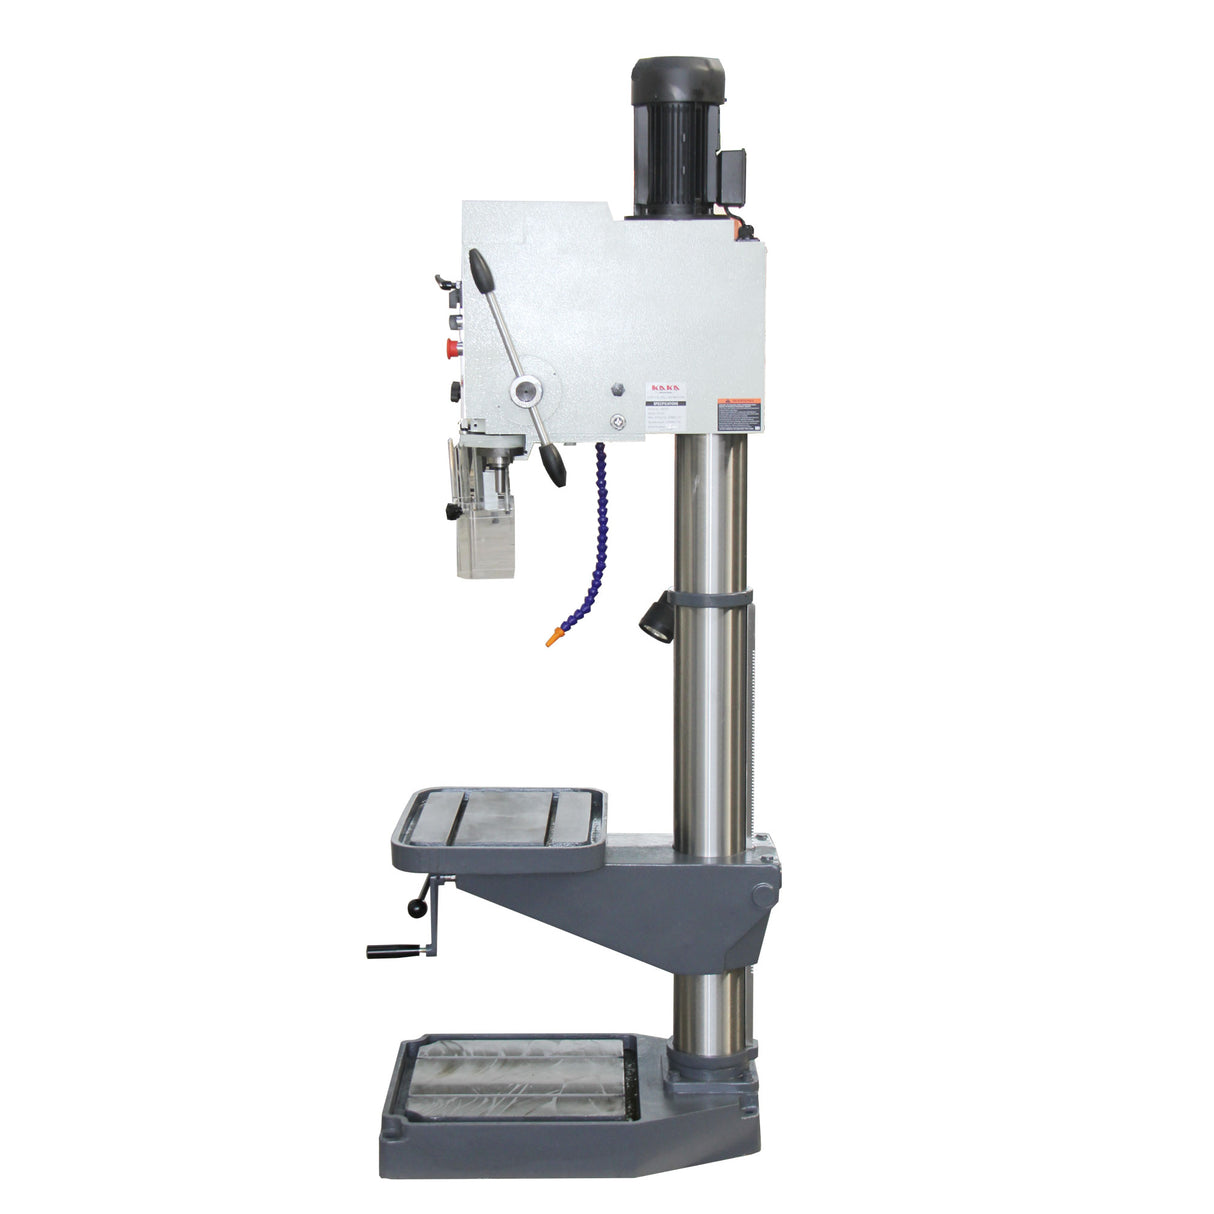 KAKA Industrial GD-40 Gear Head Vertical Drill Press, 8 Steps Speed Adjustable Head Hight Depth DRO Industrial Grade Drilling Tapping Machine with 220V 3 Phase Motor